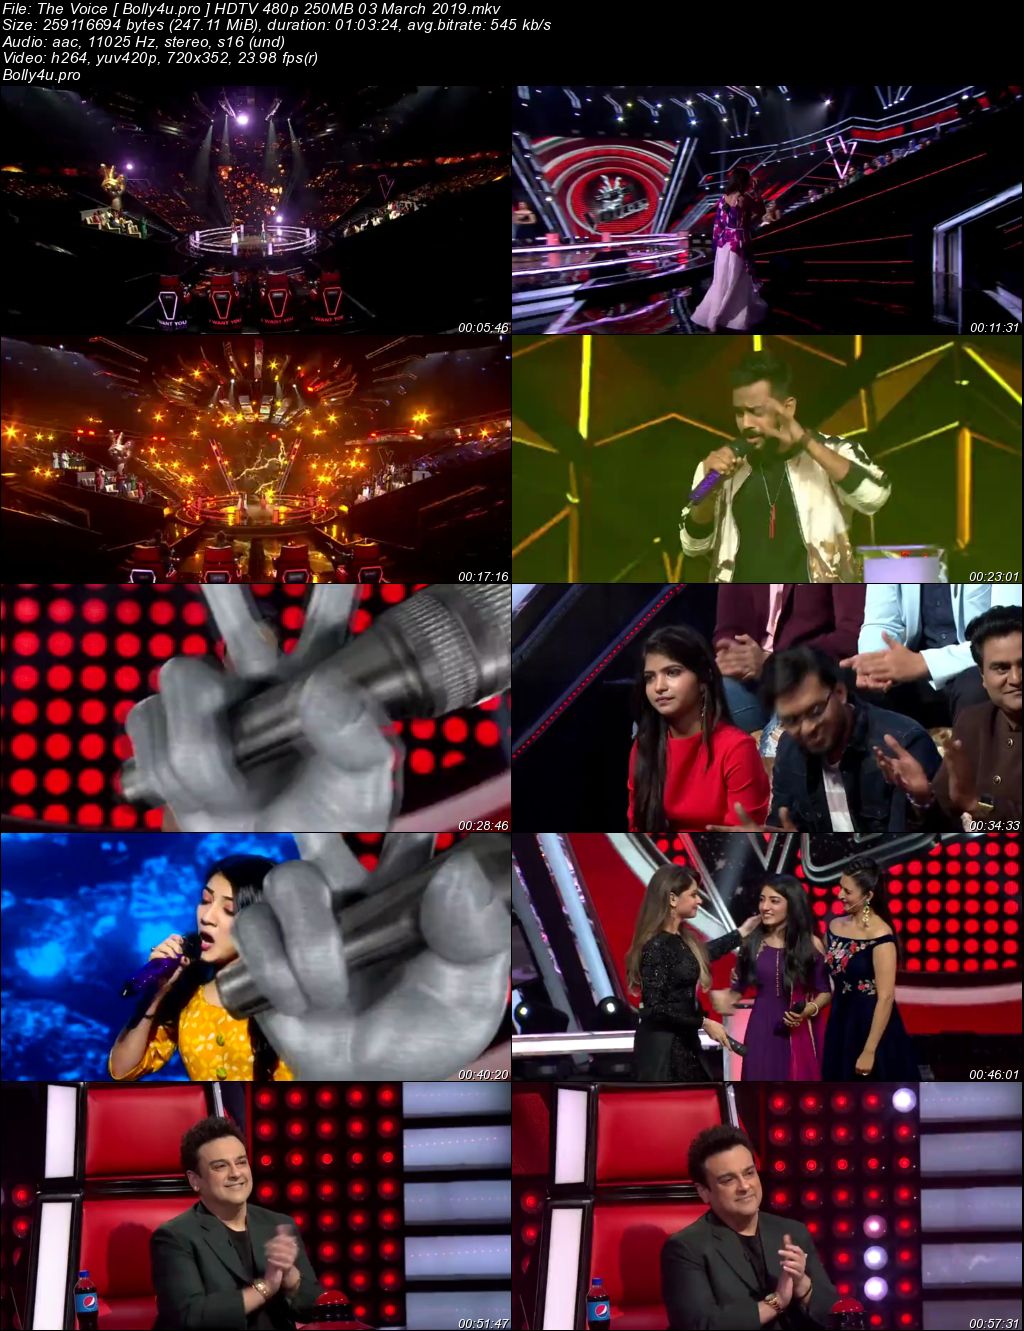 The Voice HDTV 480p 250MB 03 March 2019 Download